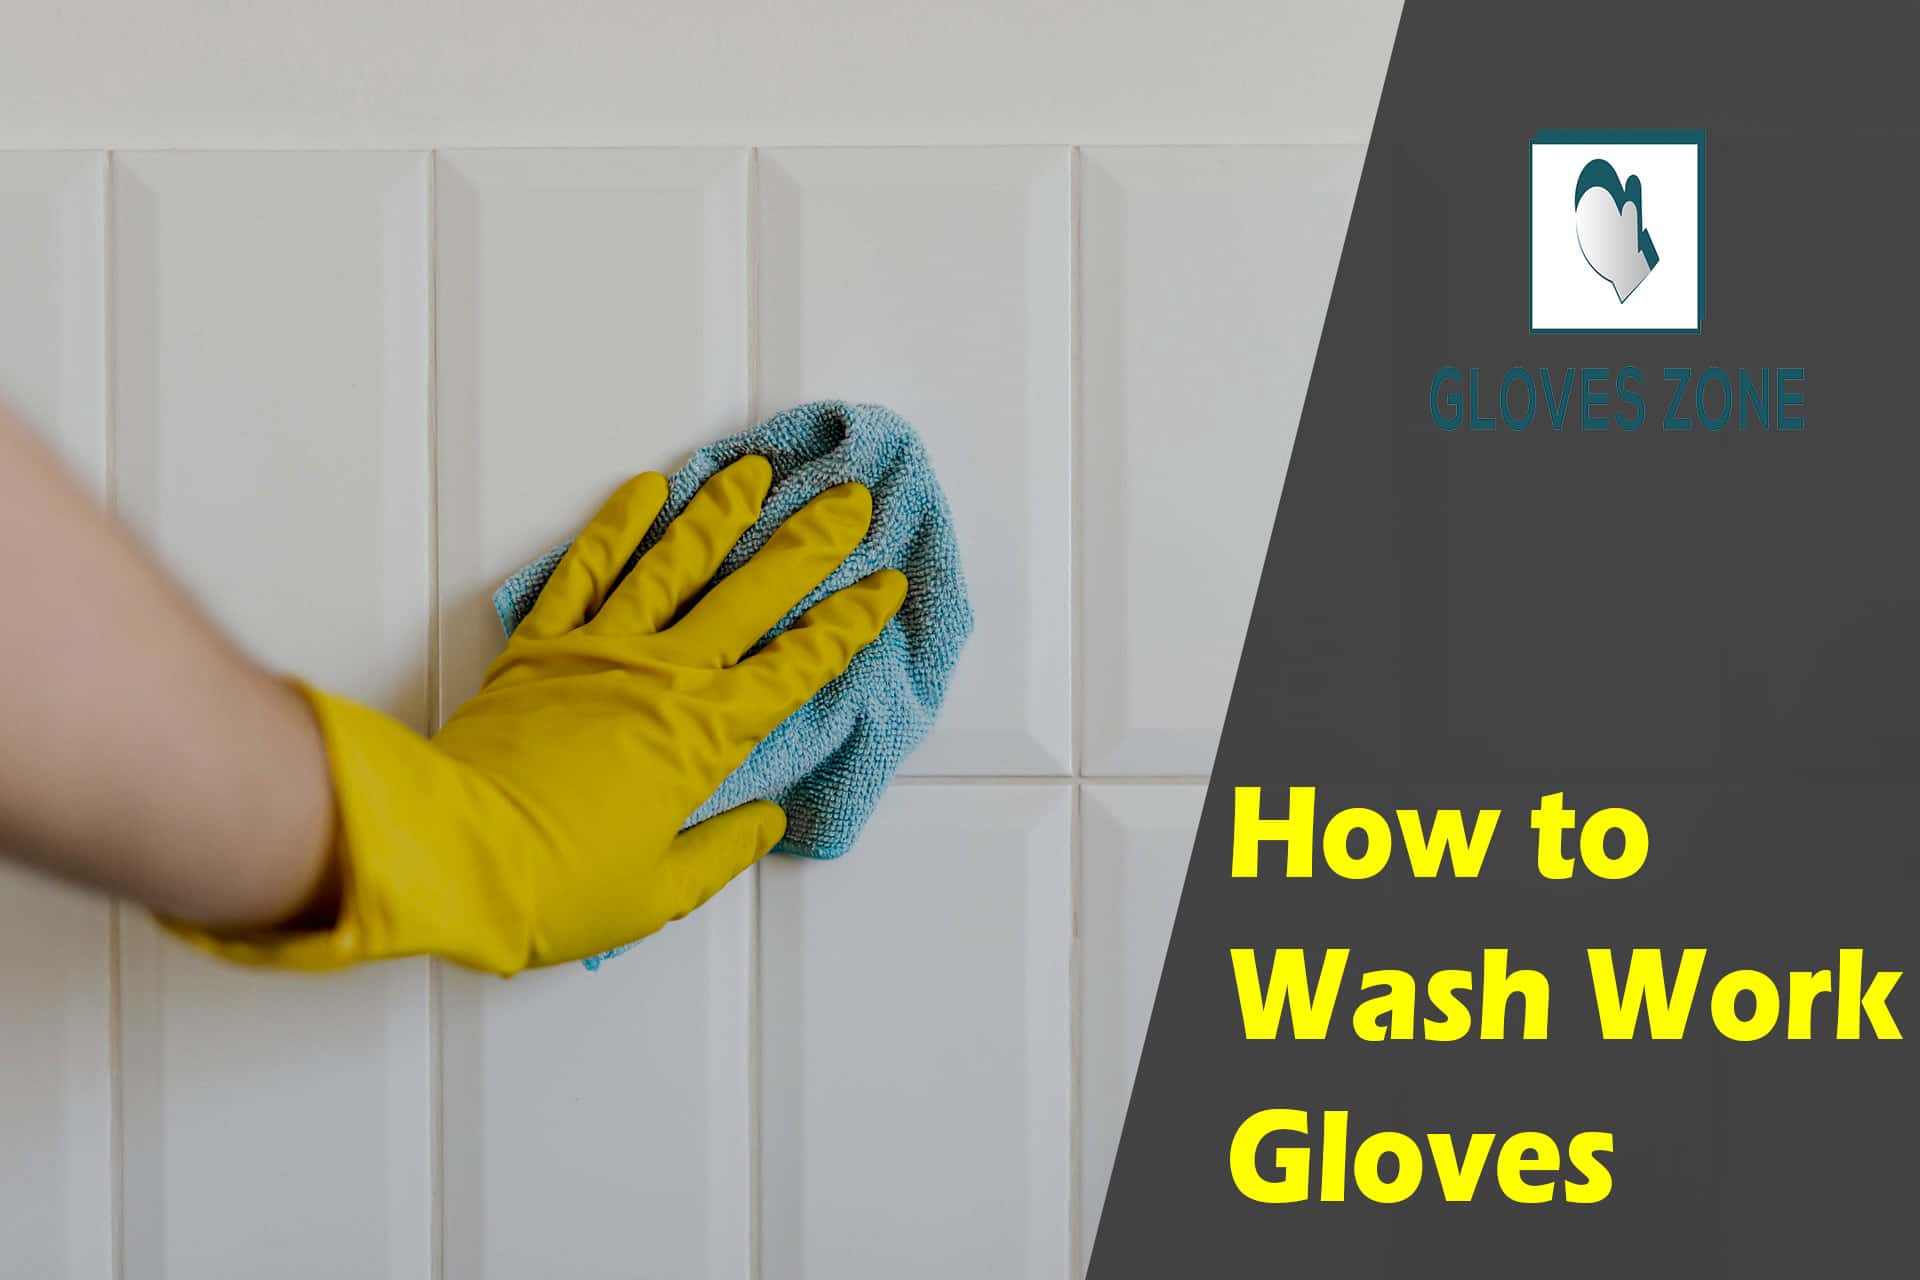 How to Wash Work Gloves